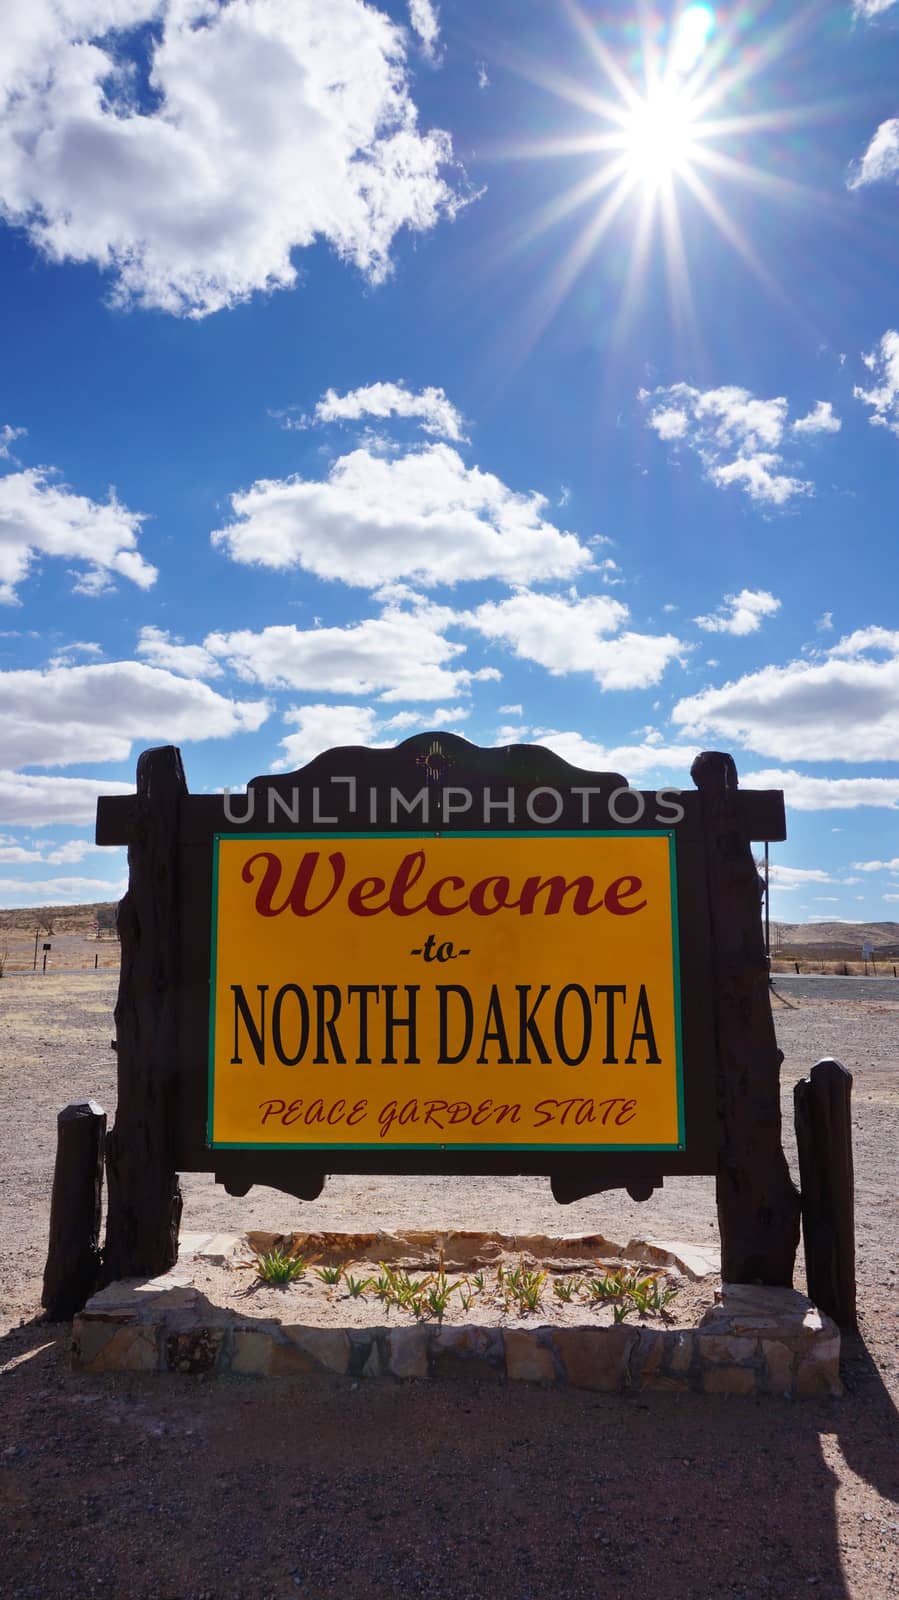 Welcome to North Dakota road sign by tang90246